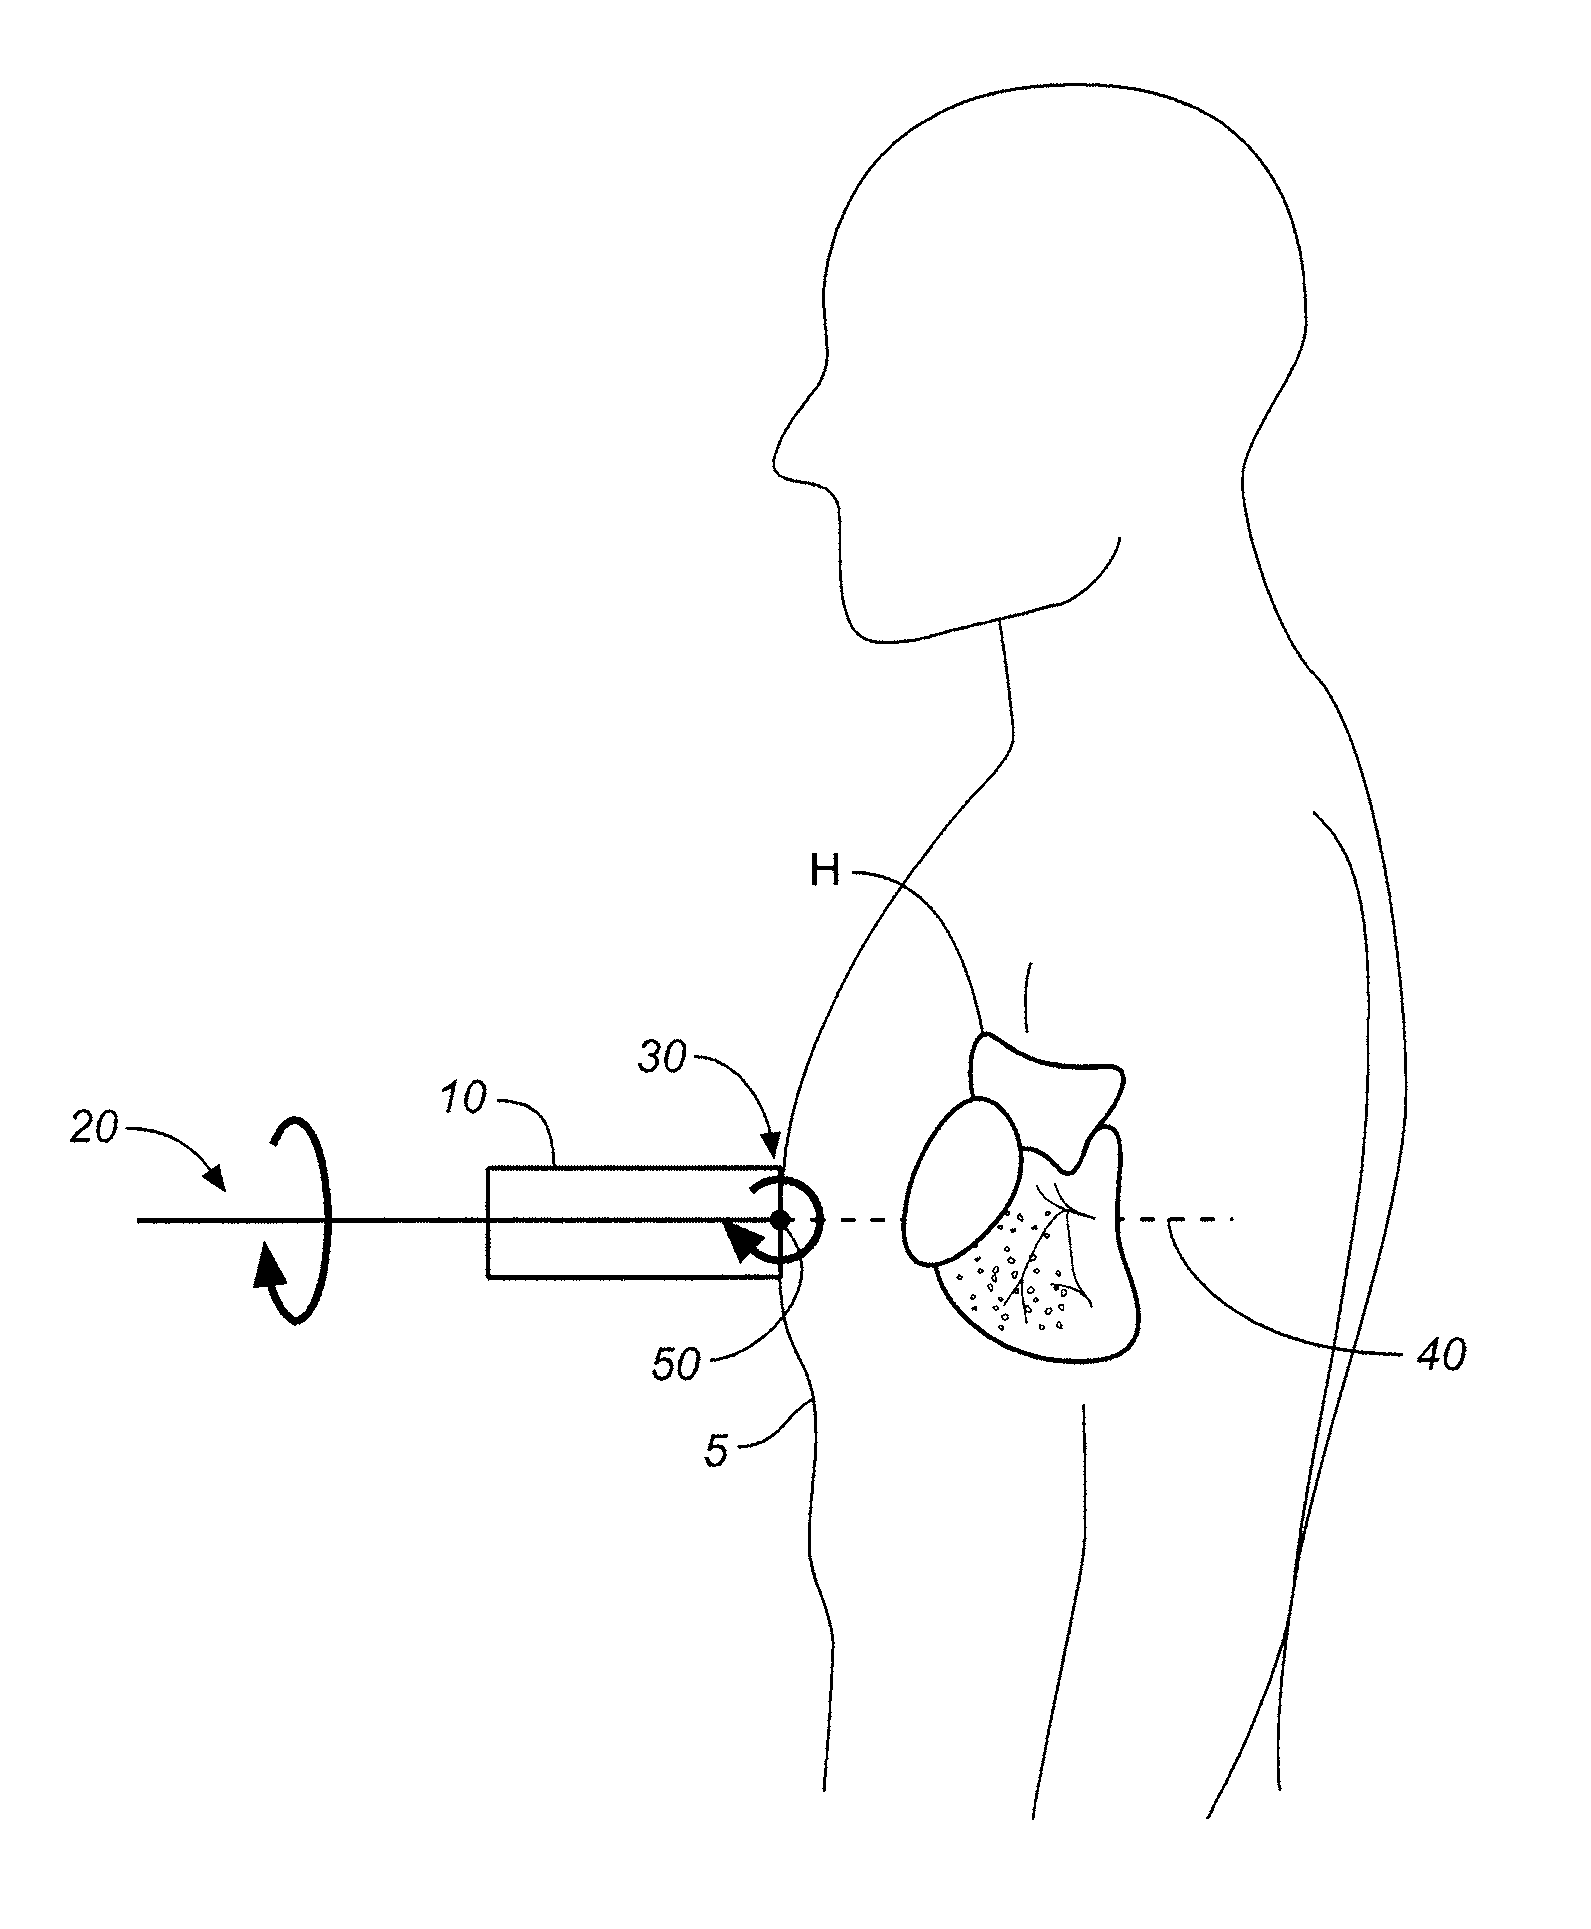 Method and apparatus to visualize the coronary arteries using ultrasound